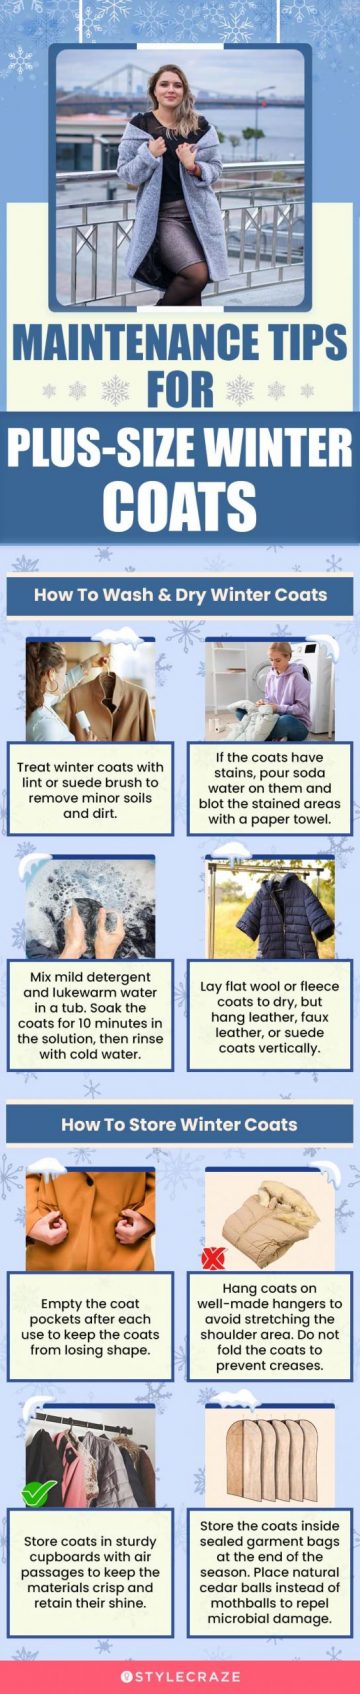 Maintenance Tips For Plus-Size Winter Coats (infographic)